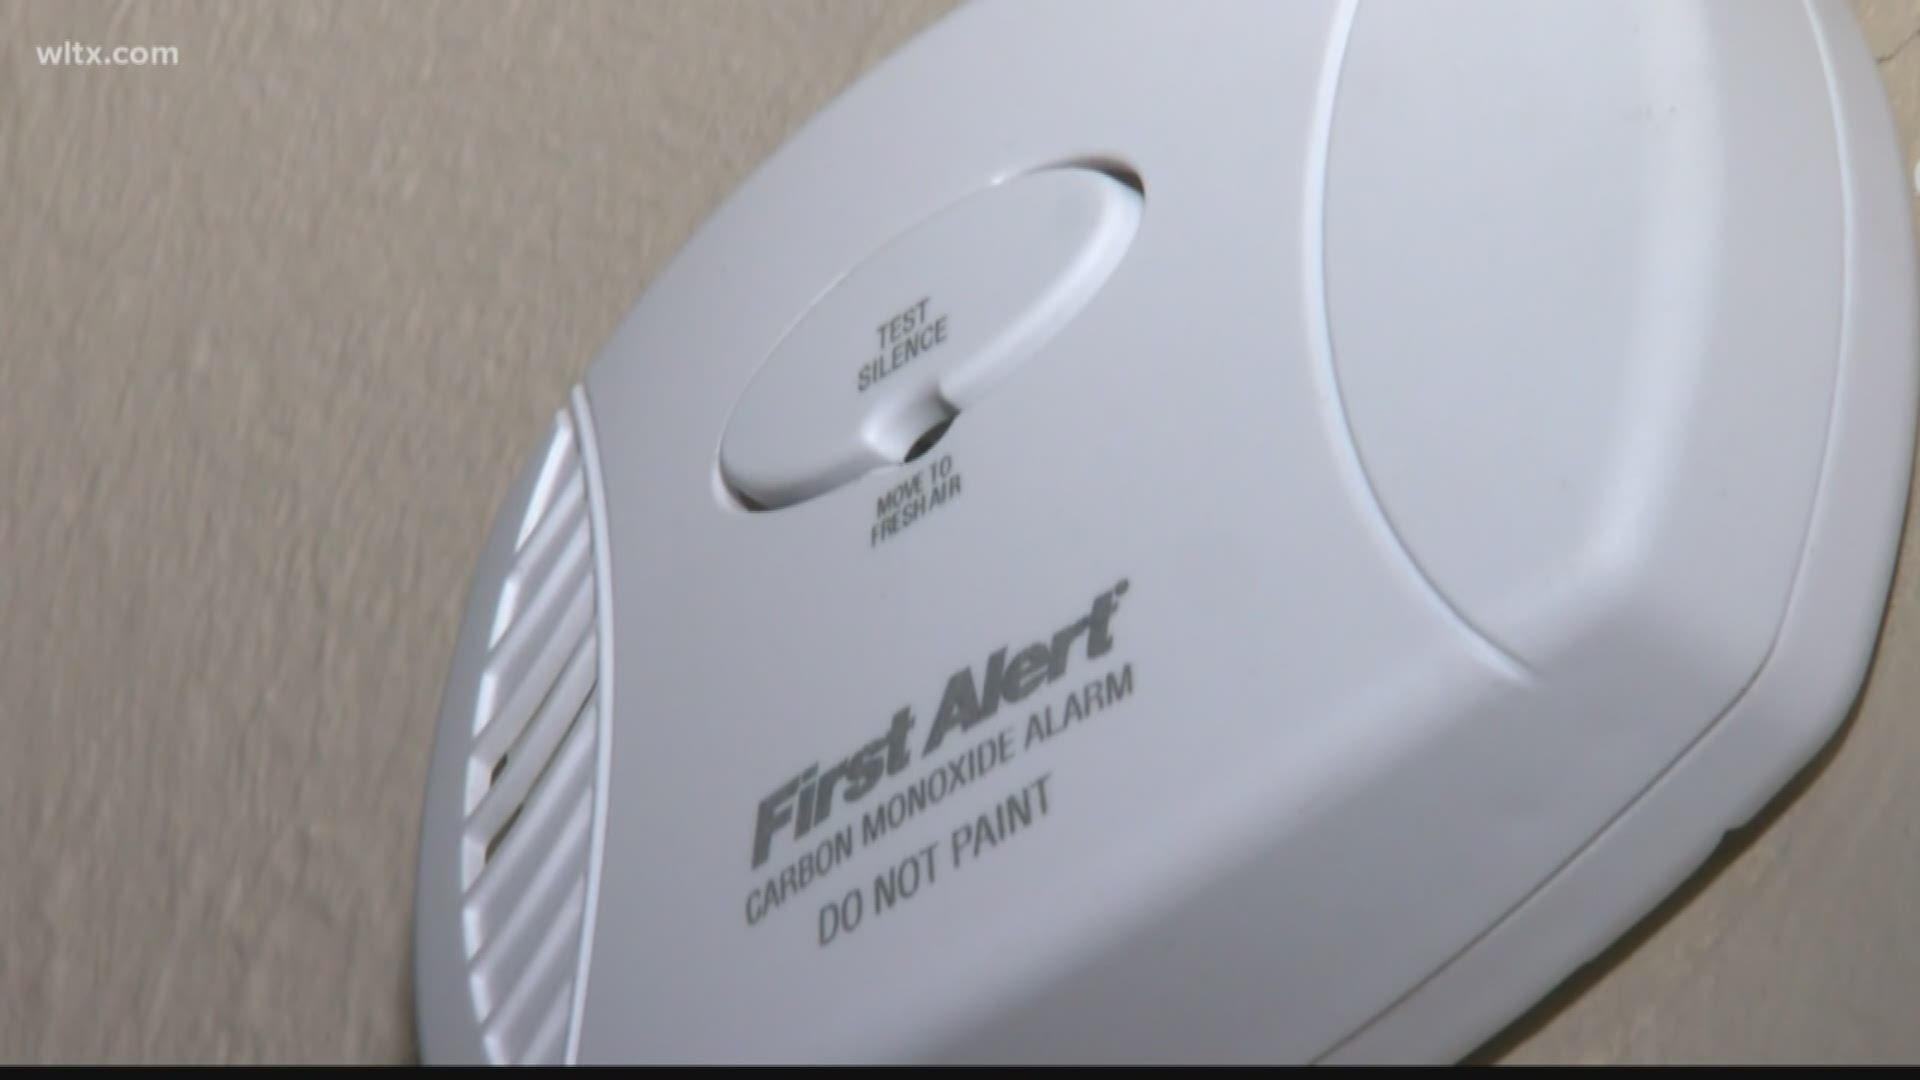 New legislation filed Monday would place carbon monoxide detectors in all public housing units.
It's called the "Safe Housing For Families Act."